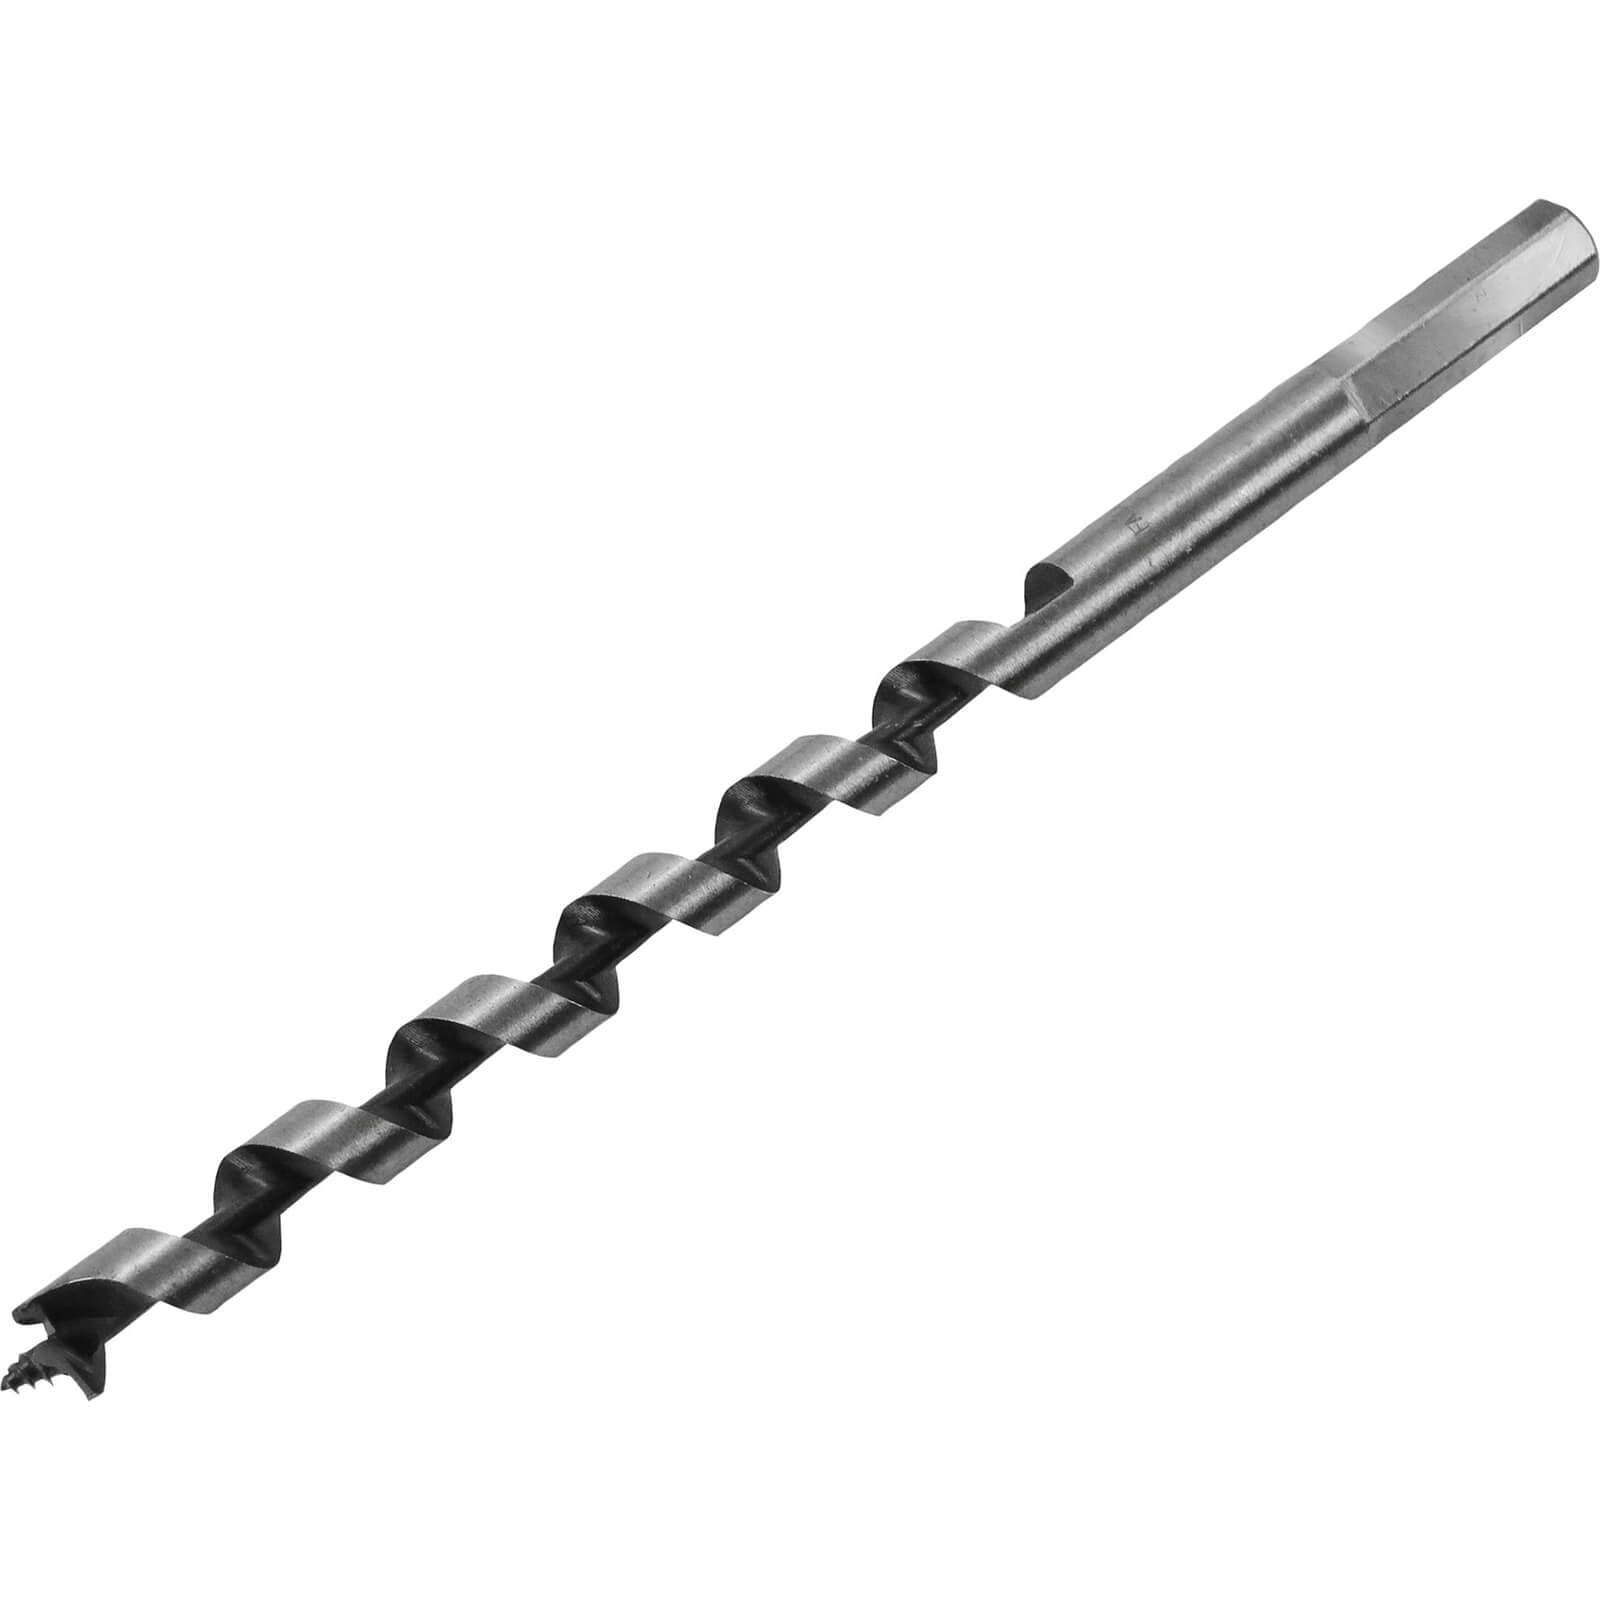 Image of Faithfull Combination Auger Drill Bit 10mm 200mm